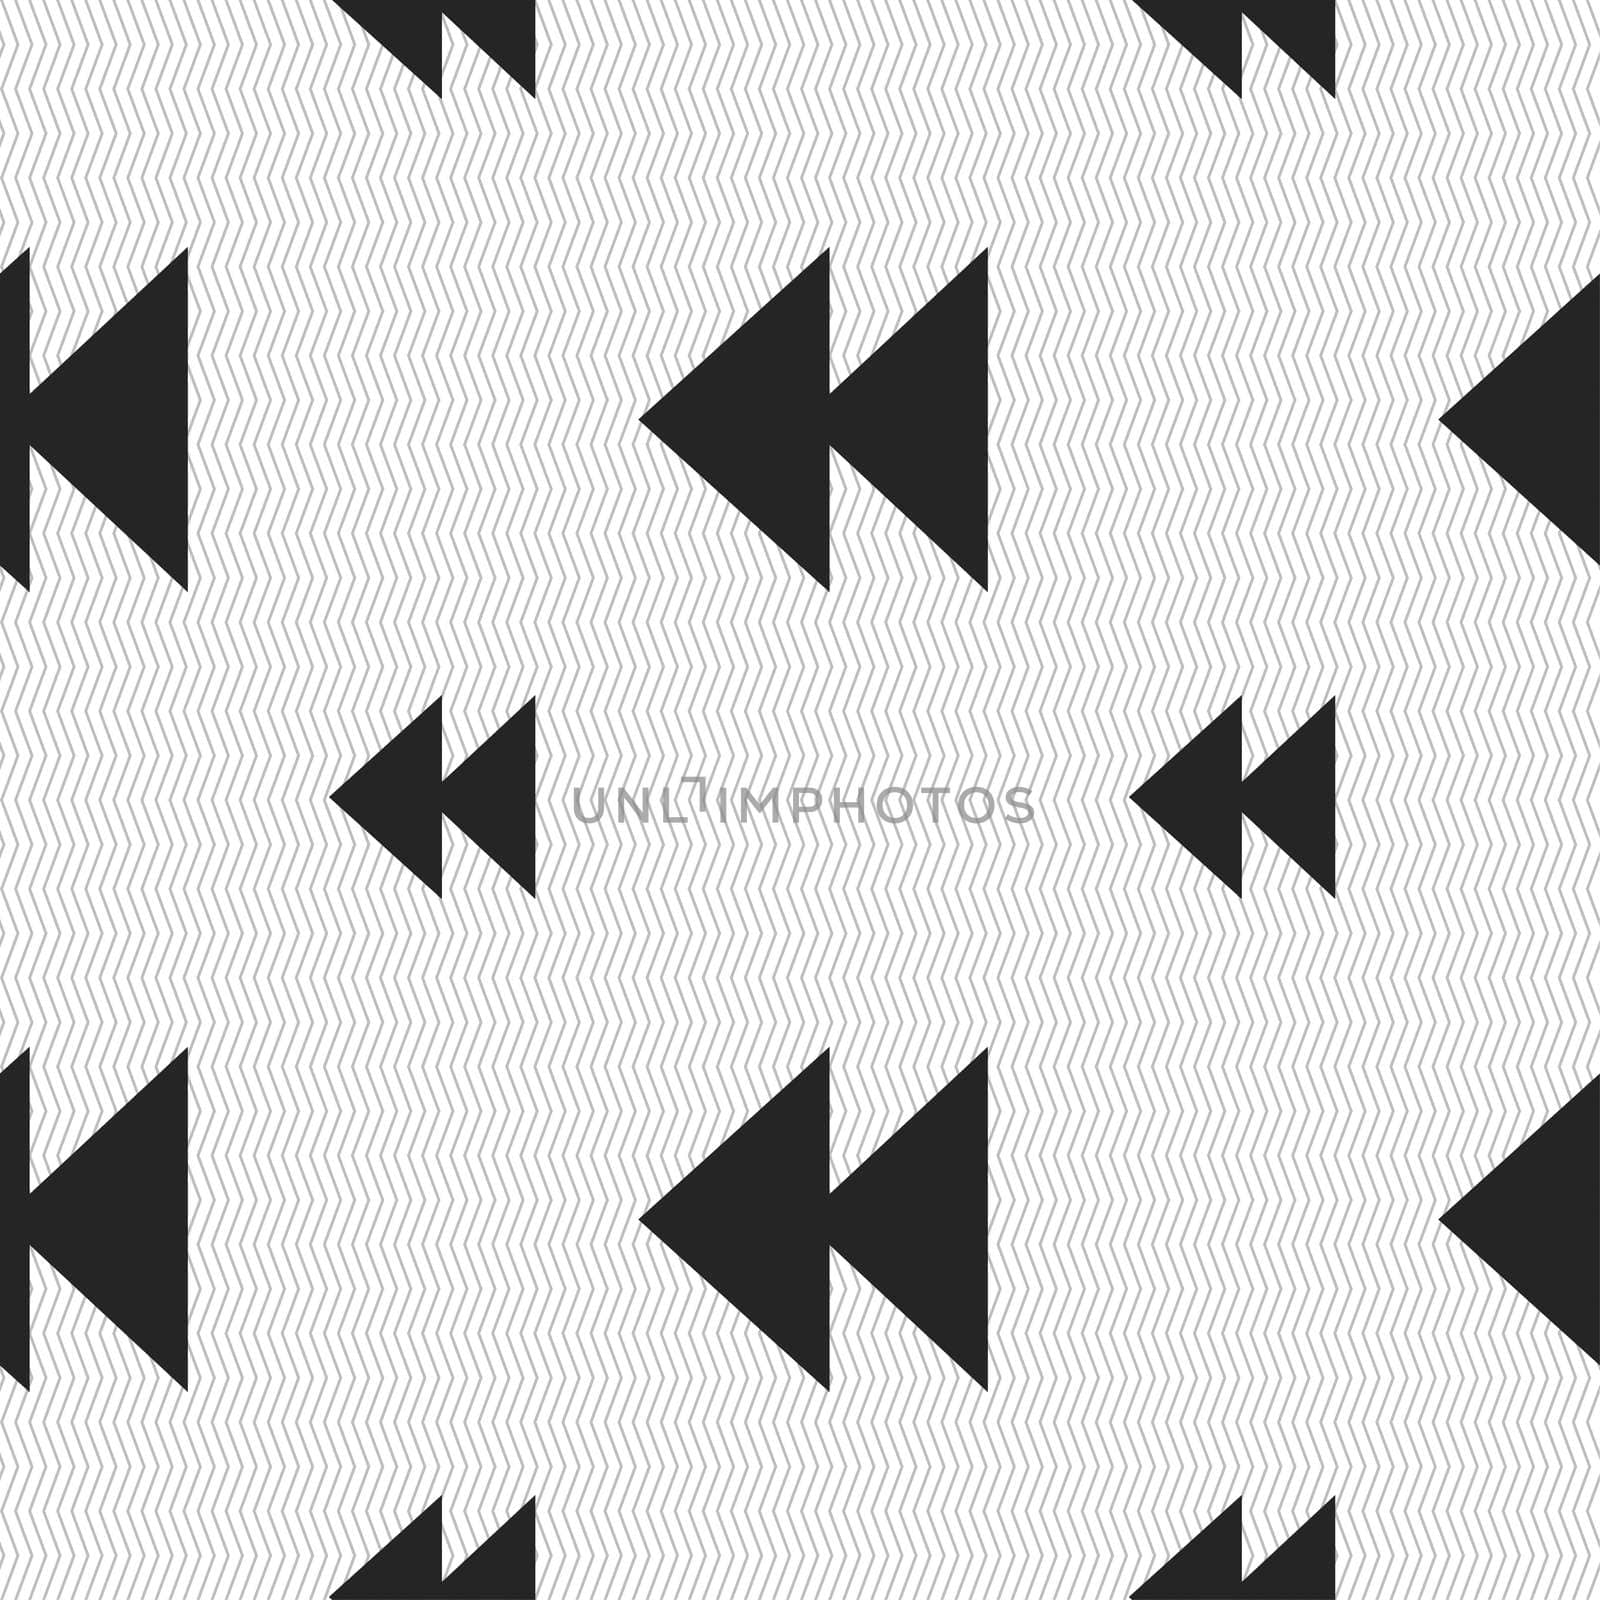 rewind icon sign. Seamless pattern with geometric texture. illustration